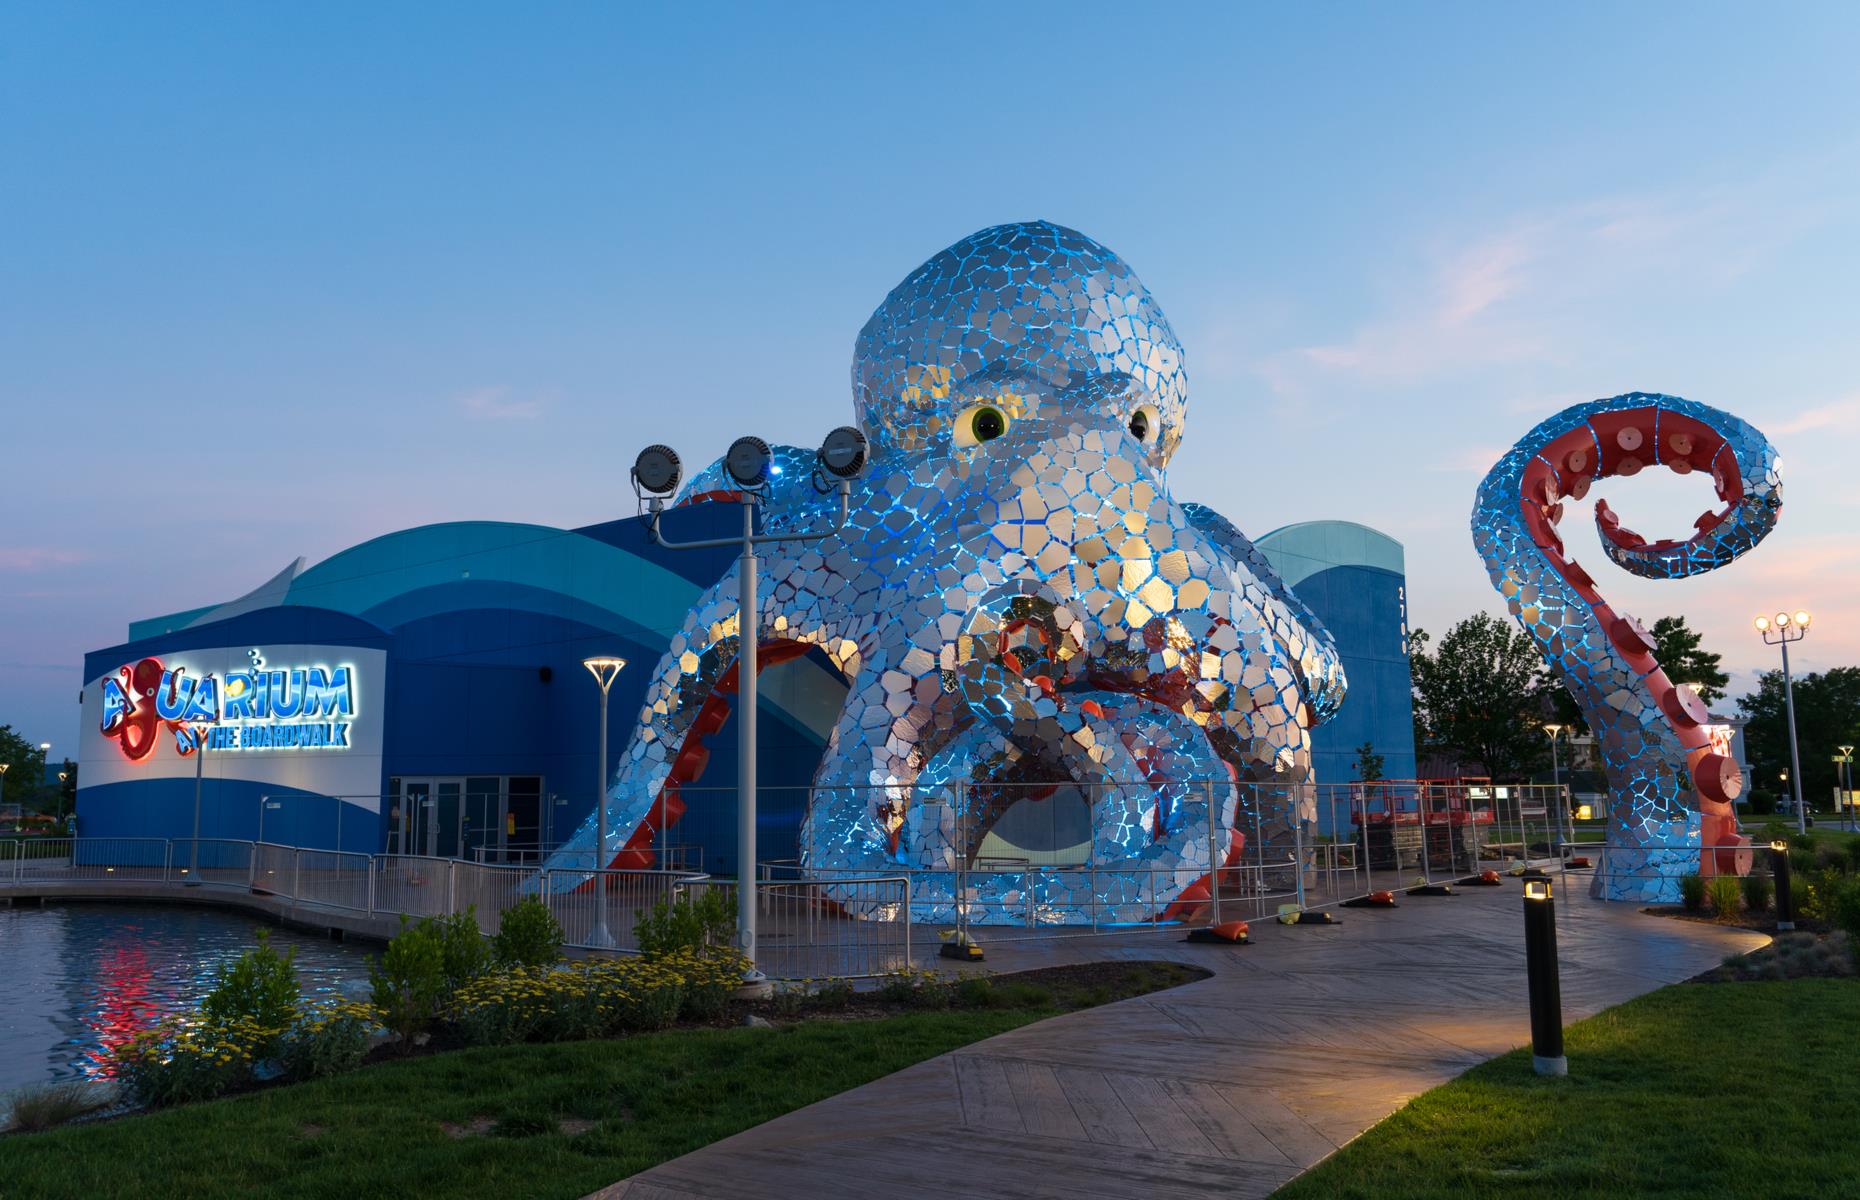 <p>You probably won’t need a map to find the <a href="https://www.aquariumattheboardwalk.com/">Aquarium at the Boardwalk</a>, opened in Branson’s entertainment district in late 2020. A giant octopus sculpture all but swallows the building, making it pretty impossible to miss. It’s a sign of the fun that’s inside, with huge tanks housing real octopuses, vibrant tropical fish, sharks and infinitely watchable seahorses. Families can immerse themselves in this ocean world by walking through the underwater tunnel or entering the Jelly Infinity Room, with tall tanks filled with bioluminescent moon jellies.</p>